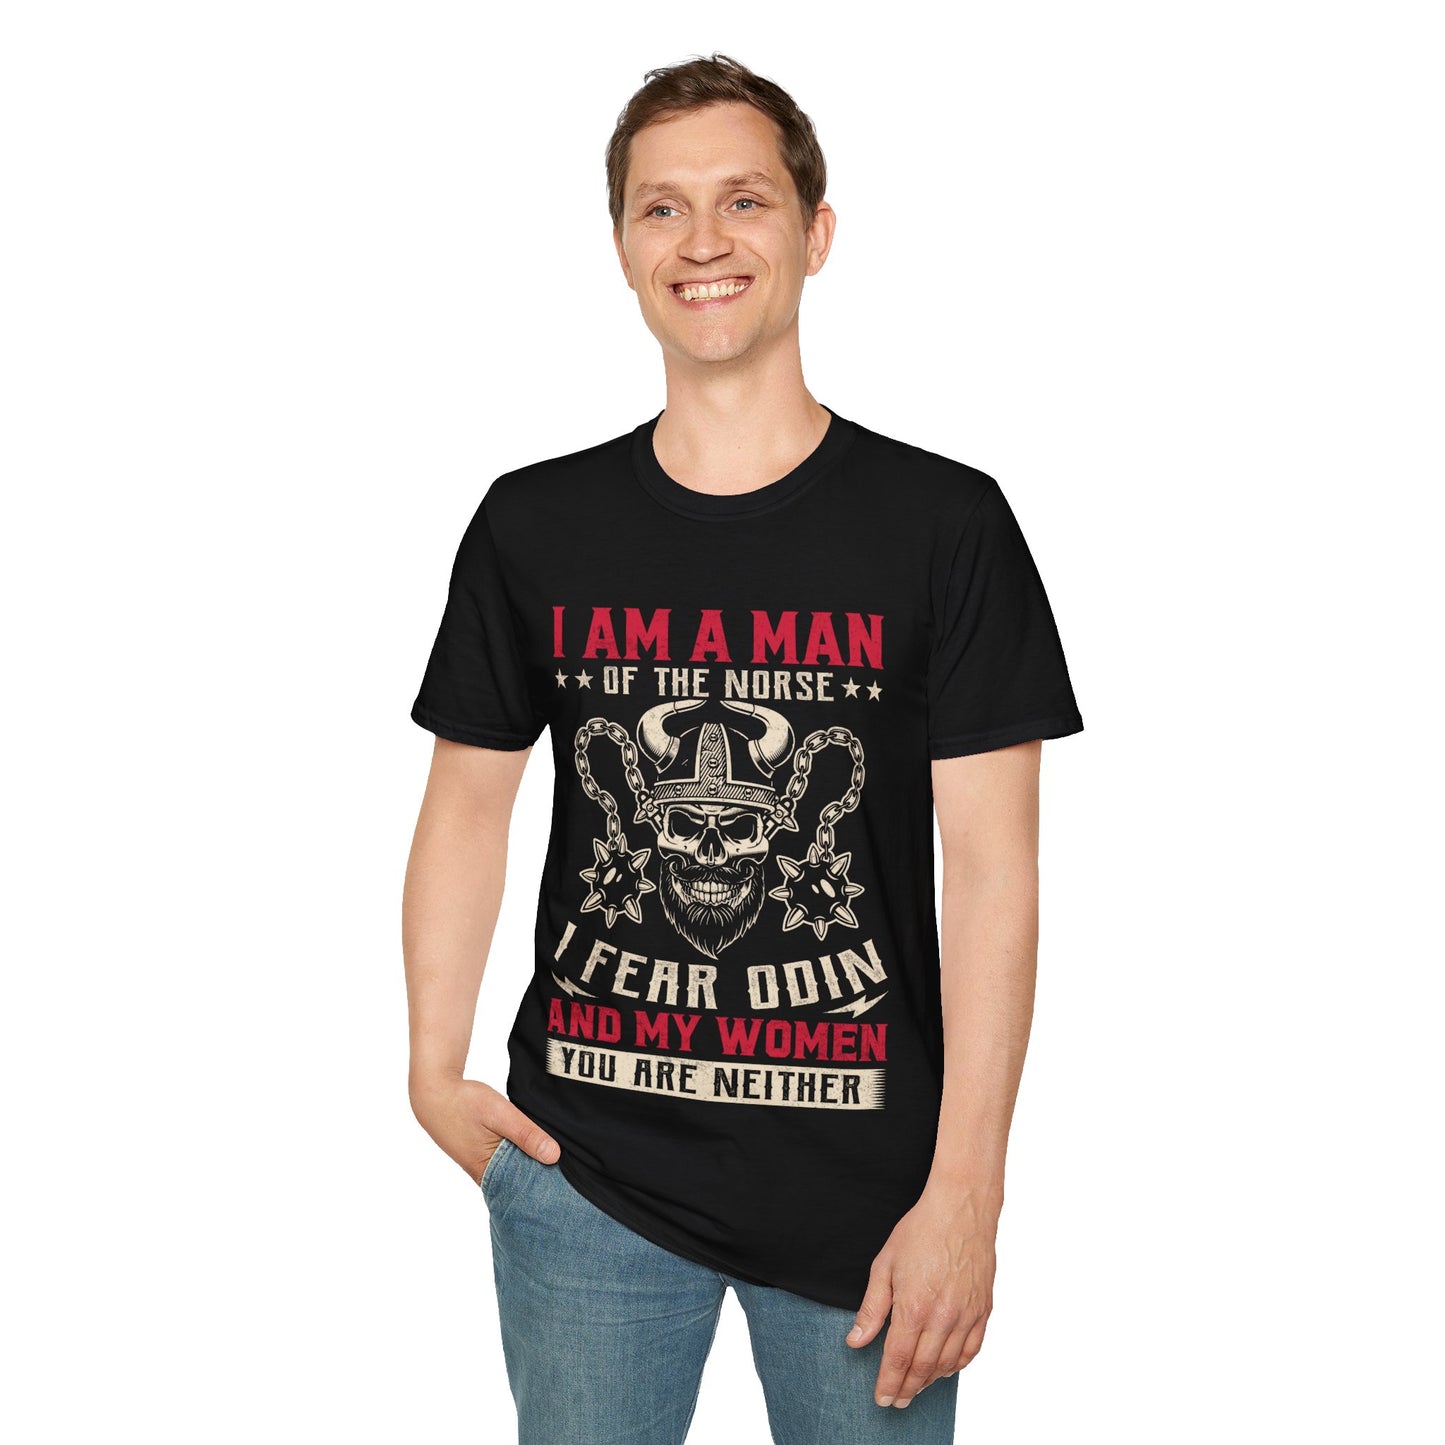 I Am A Man Of The Norse I Fear Odin And My Women You Are Neither Viking T-Shirt